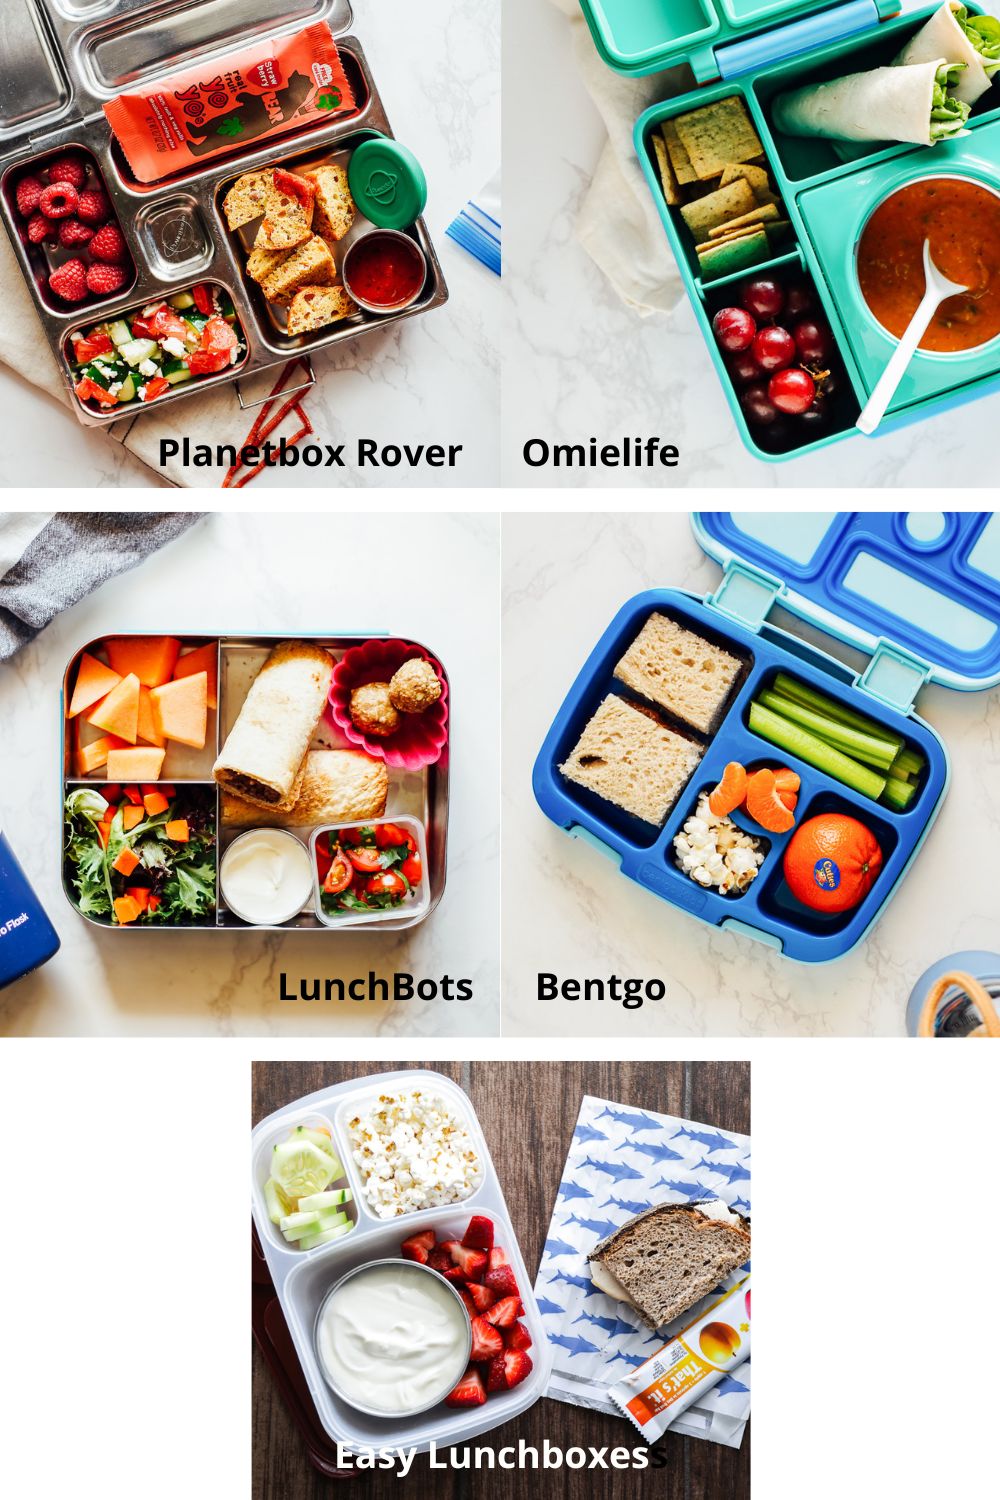 Best bento boxes: planetbox rover, omielife, lunchbots, bentgo, and easy lunchboxes.